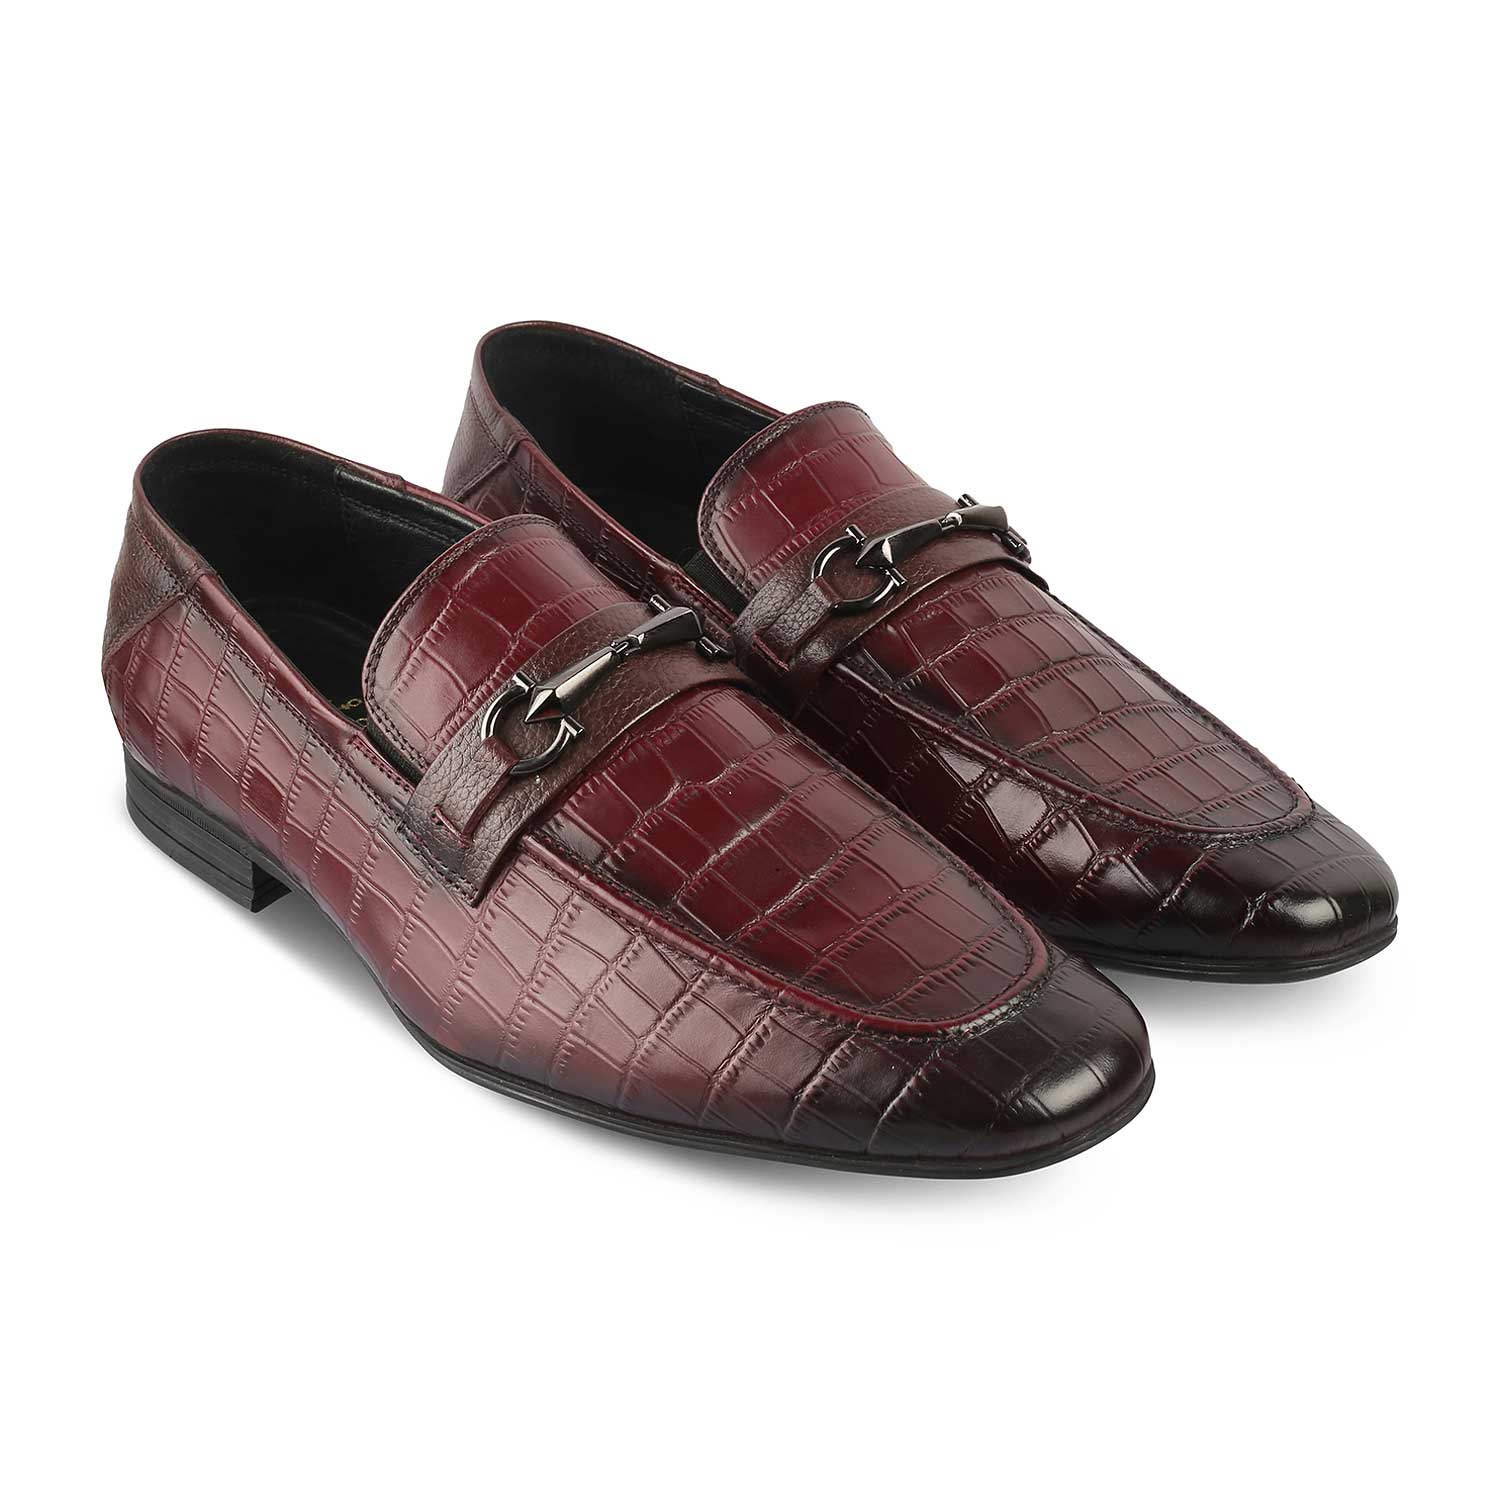 The Reptile Wine Mens Leather Loafers Online at Tresmode.com